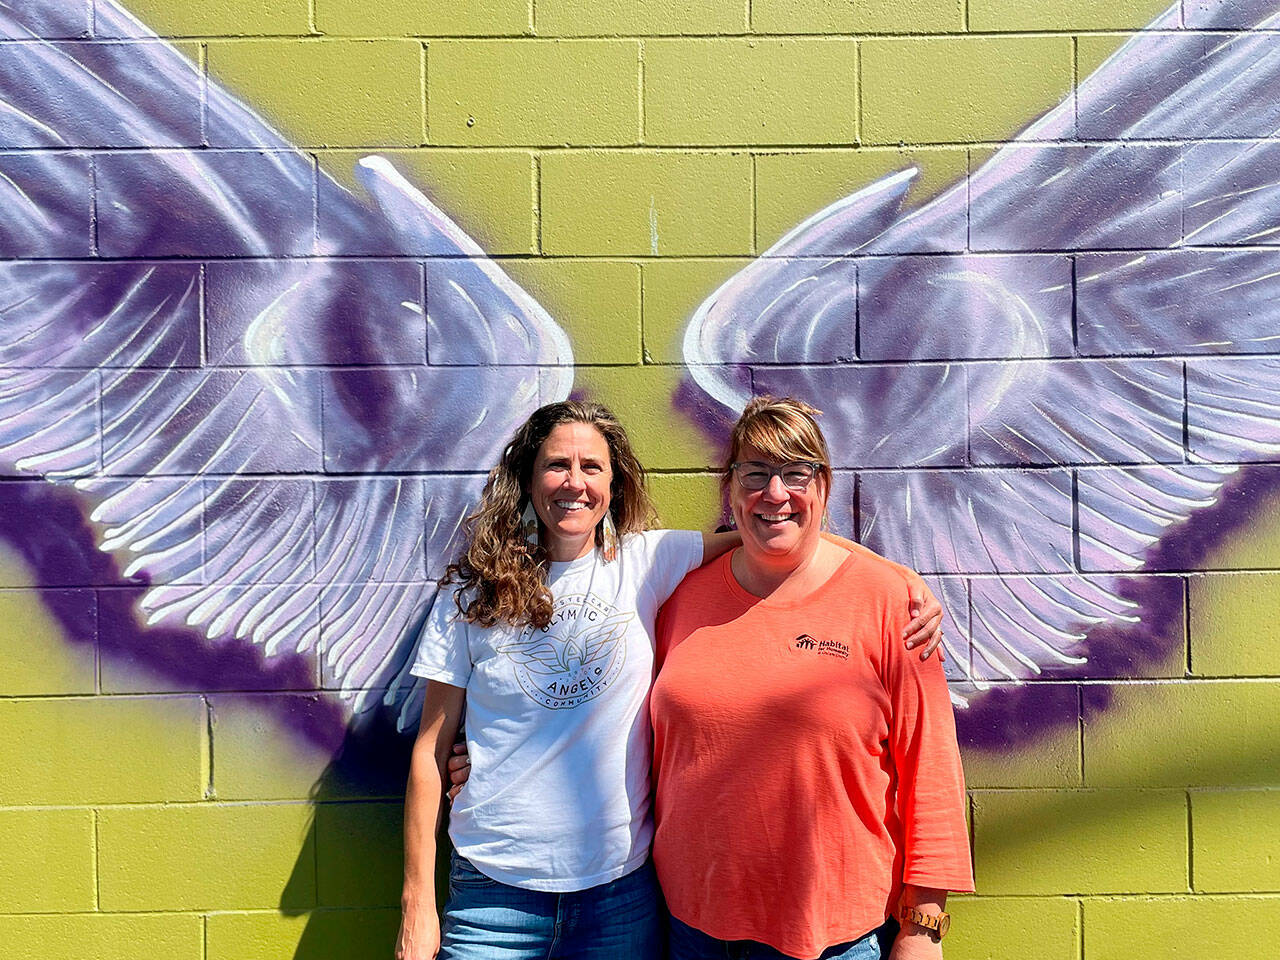 A mural by Craig Robinson in downtown Sequim represents a new partnership between Olympic Angels and Habitat for Humanity of Clallam County. Executive director Morgan Hanna with Olympic Angels, left, said they seek volunteers and mentors to help foster families. Colleen Robinson, chief executive officer for Habitat, said people are welcome to take photos on the wall of Habitat’s Boutique Store and they’ll place a sandwich board sign with information outside, and provide pamphlets about Olympic Angels during business hours. (Matthew Nash/Olympic Peninsula News Group)